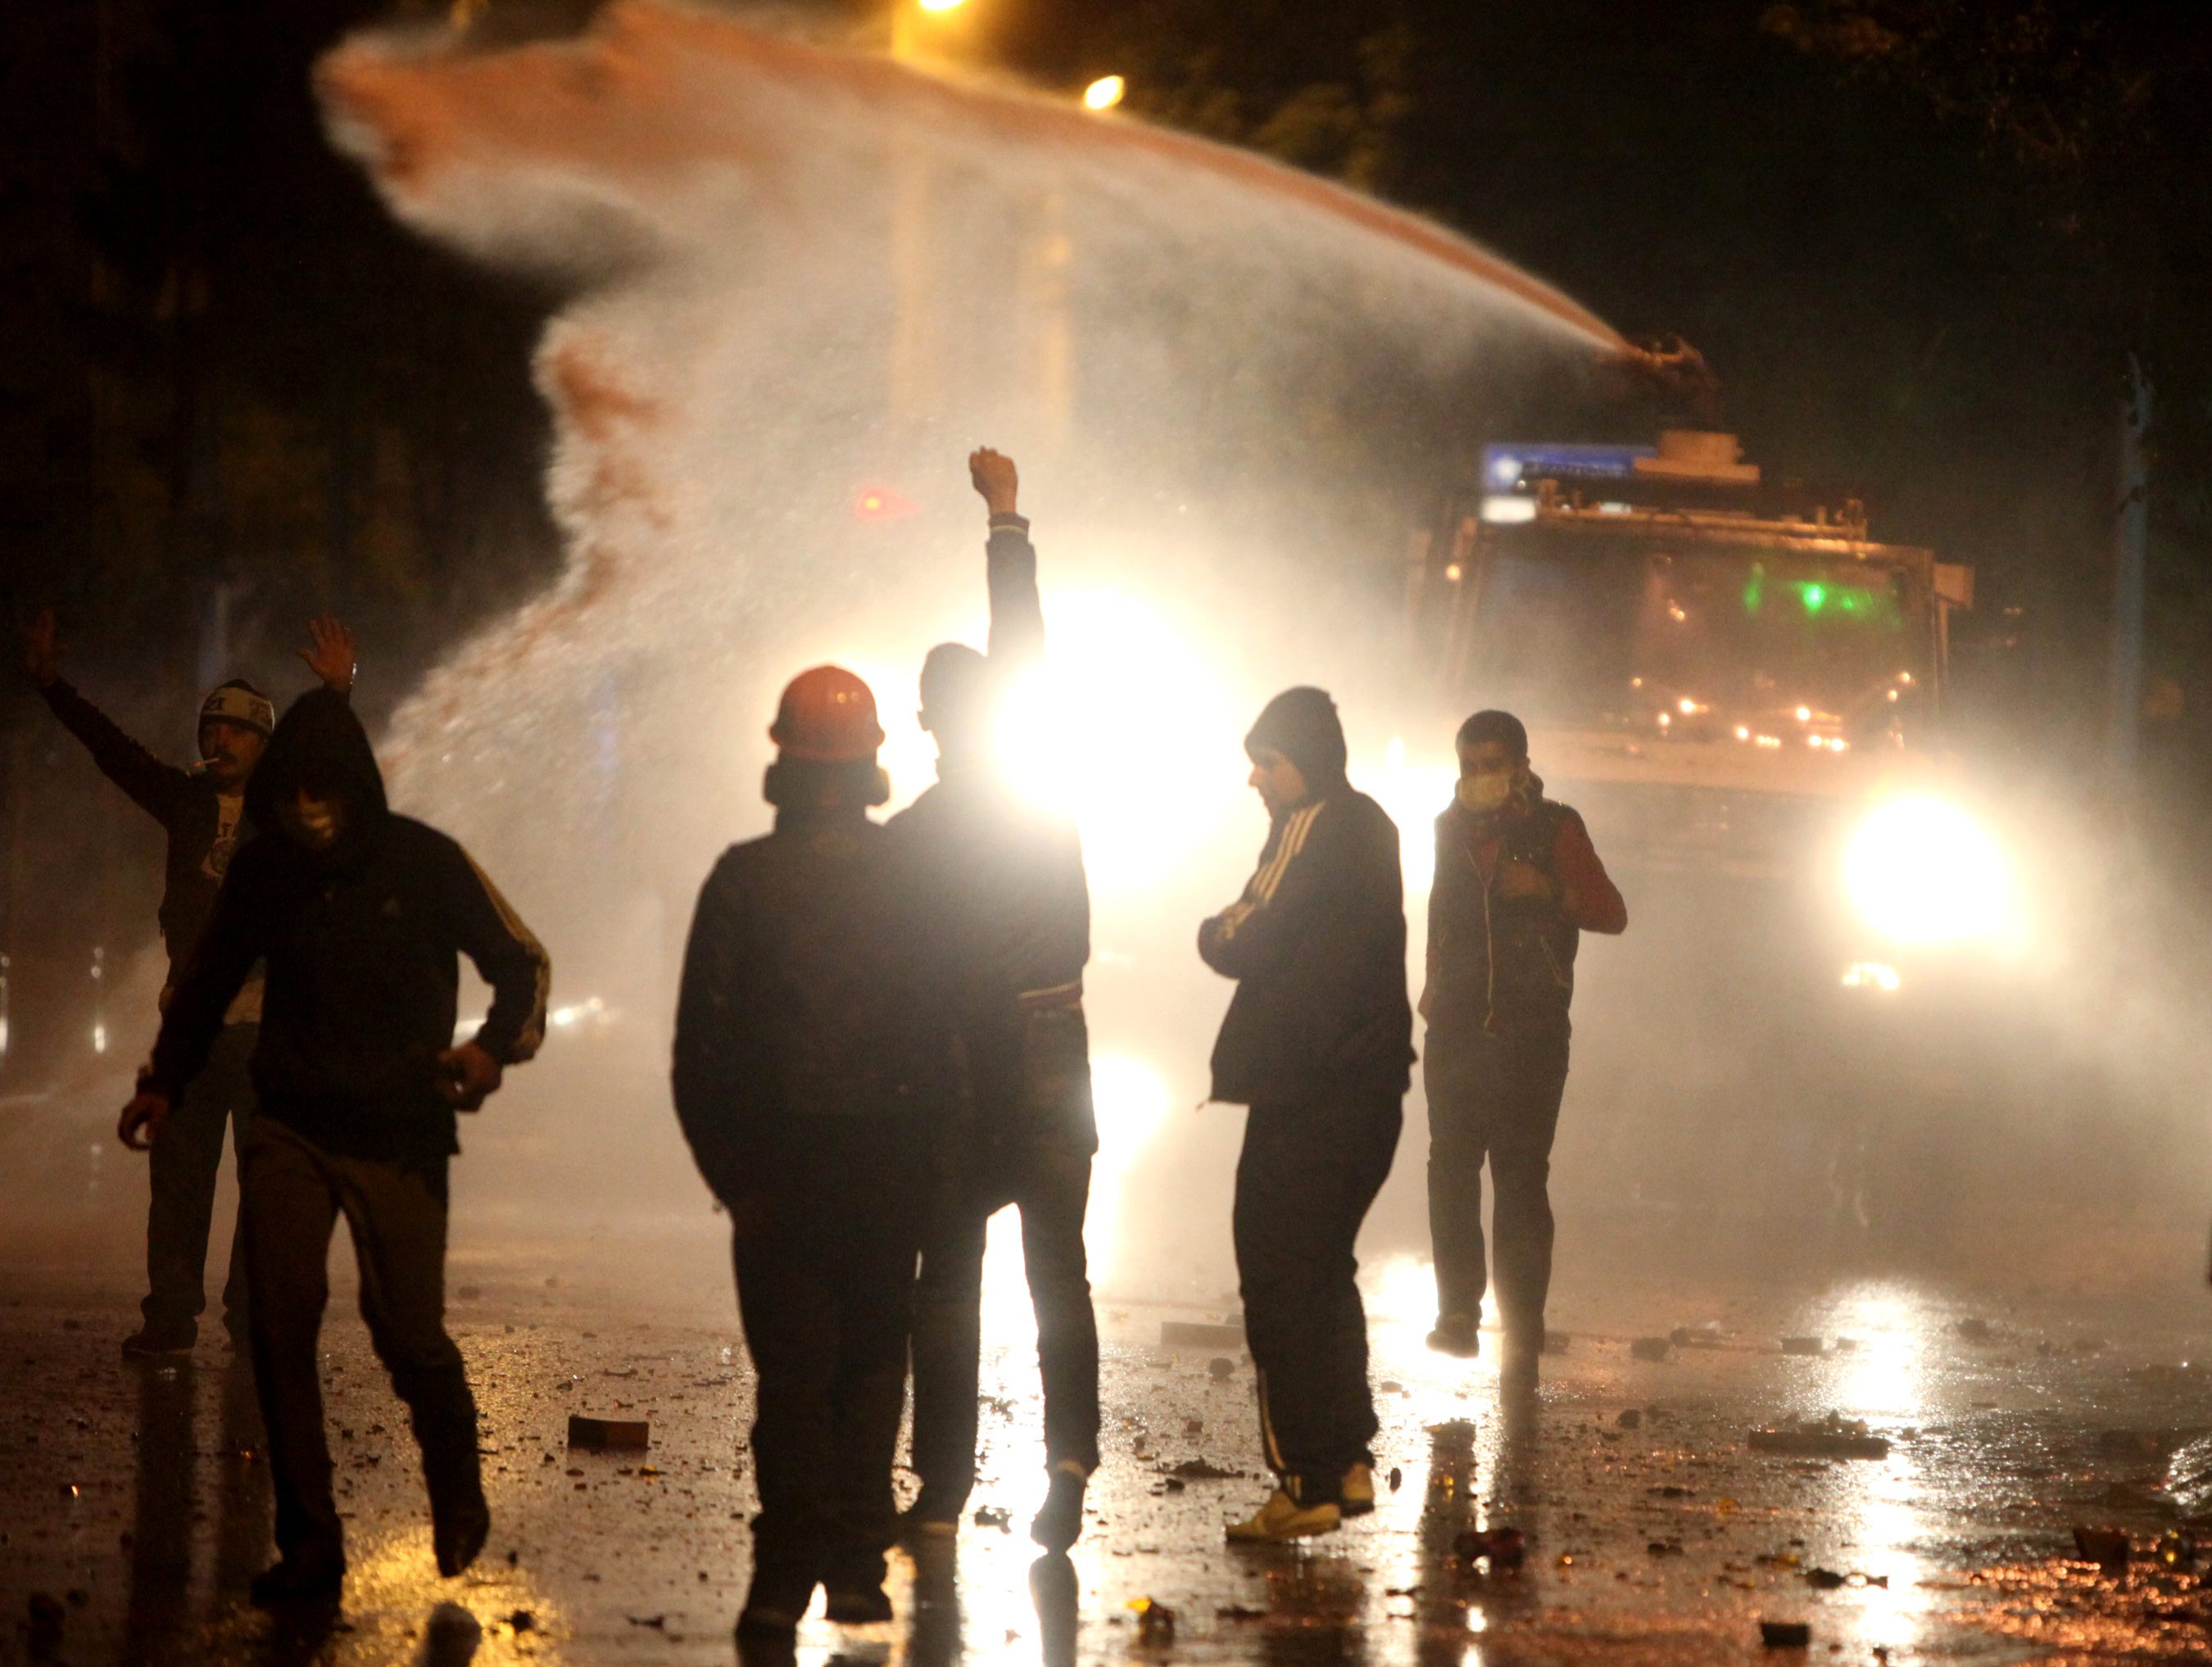 Riot police fire water cannons at anti-government protesters in central Ankara. Photo: Reuters